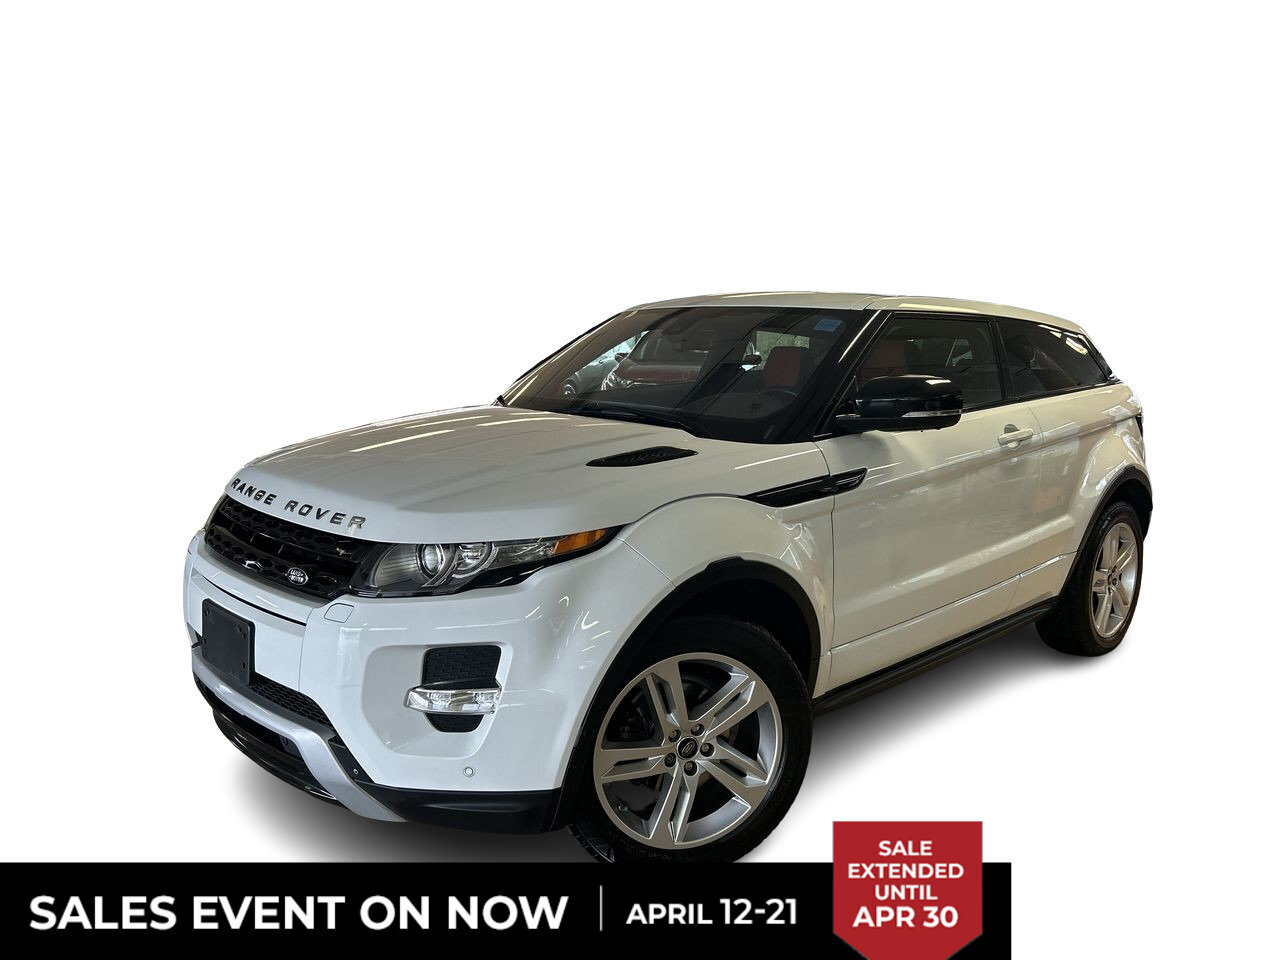 2013 Land Rover Range Rover Evoque | Dilawri Pre-Owned Event ON Now! | / | Low AVG KM